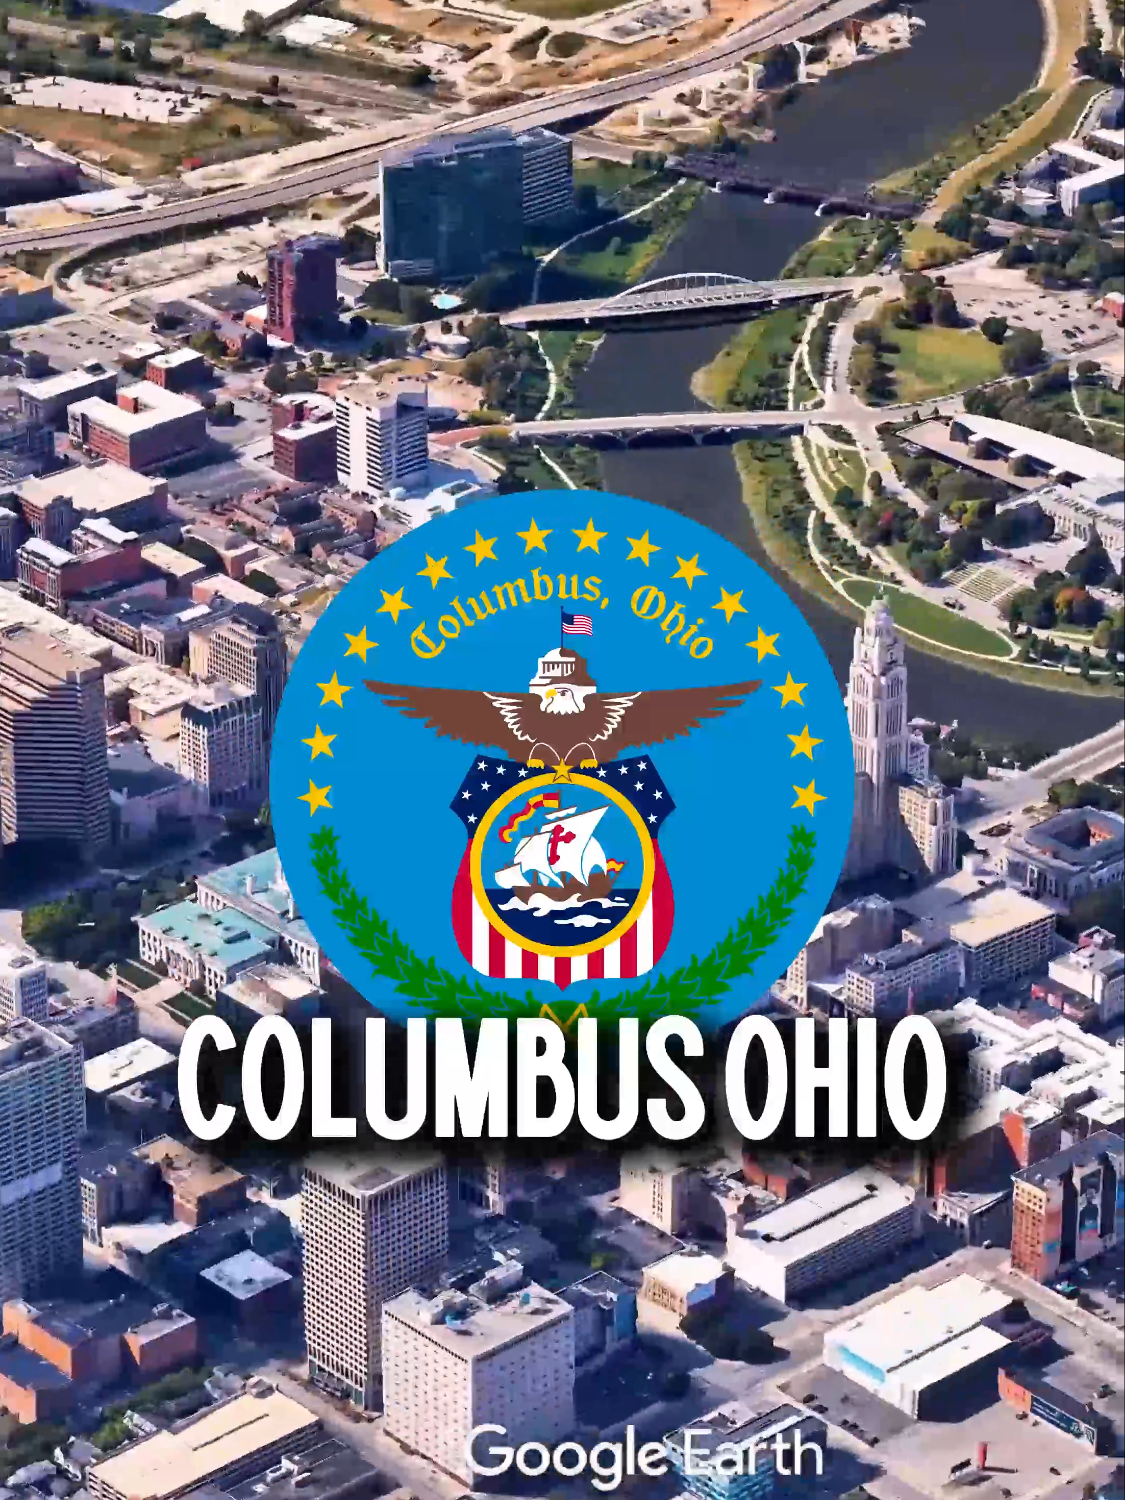 June is DONE and the Pride Party's over, time to drive back home to COLUMBUS OHIO and celebrate REAL AMERICAN PRIDE! 🇺🇸🦅🏈🛣️ Special cameo at 0:02 by @doll_deranged #satire #columbusohio #usa #urbanism #citylife#ohio #onlyinohio #flavortown  #cityplanning #geography #carculture #guyfieri  This is original content made by me and is NOT AI generated. The voice is text to speech, but that is me in the first frames of the video and it was written and edited by me, a REAL person.